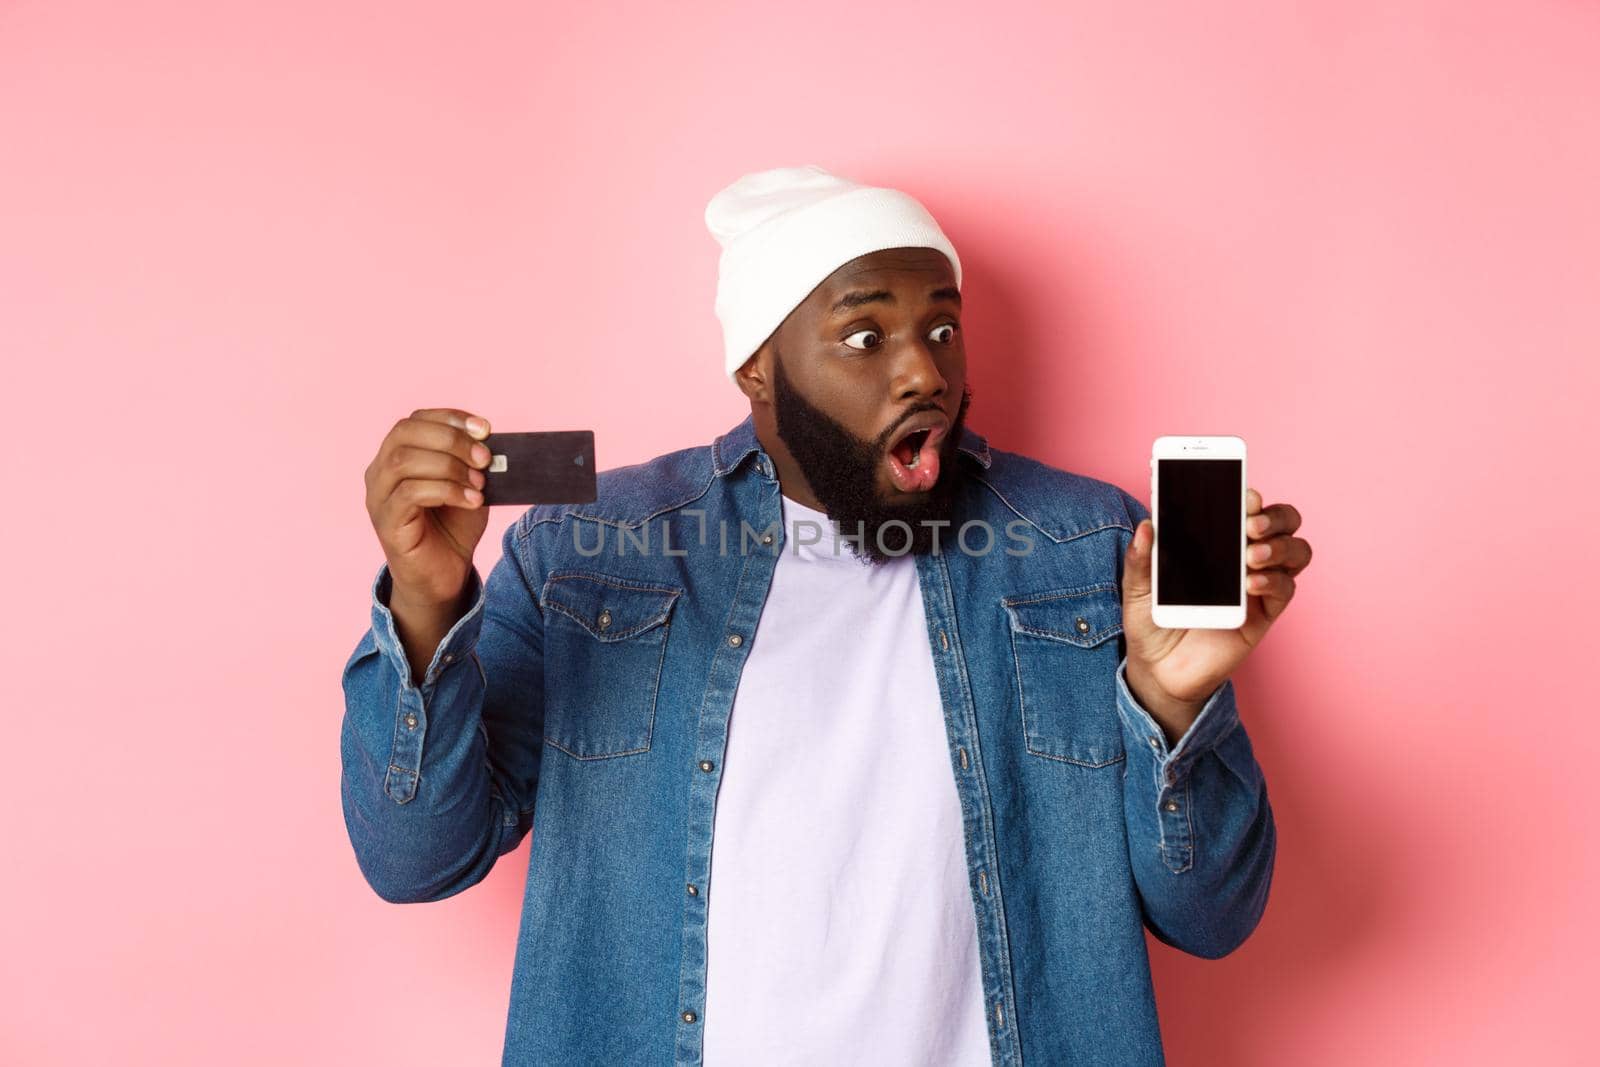 Online shopping. Impressed and surprised Black man showing credit card, staring at smartphone screen, demonstrate app, standing over pink background.